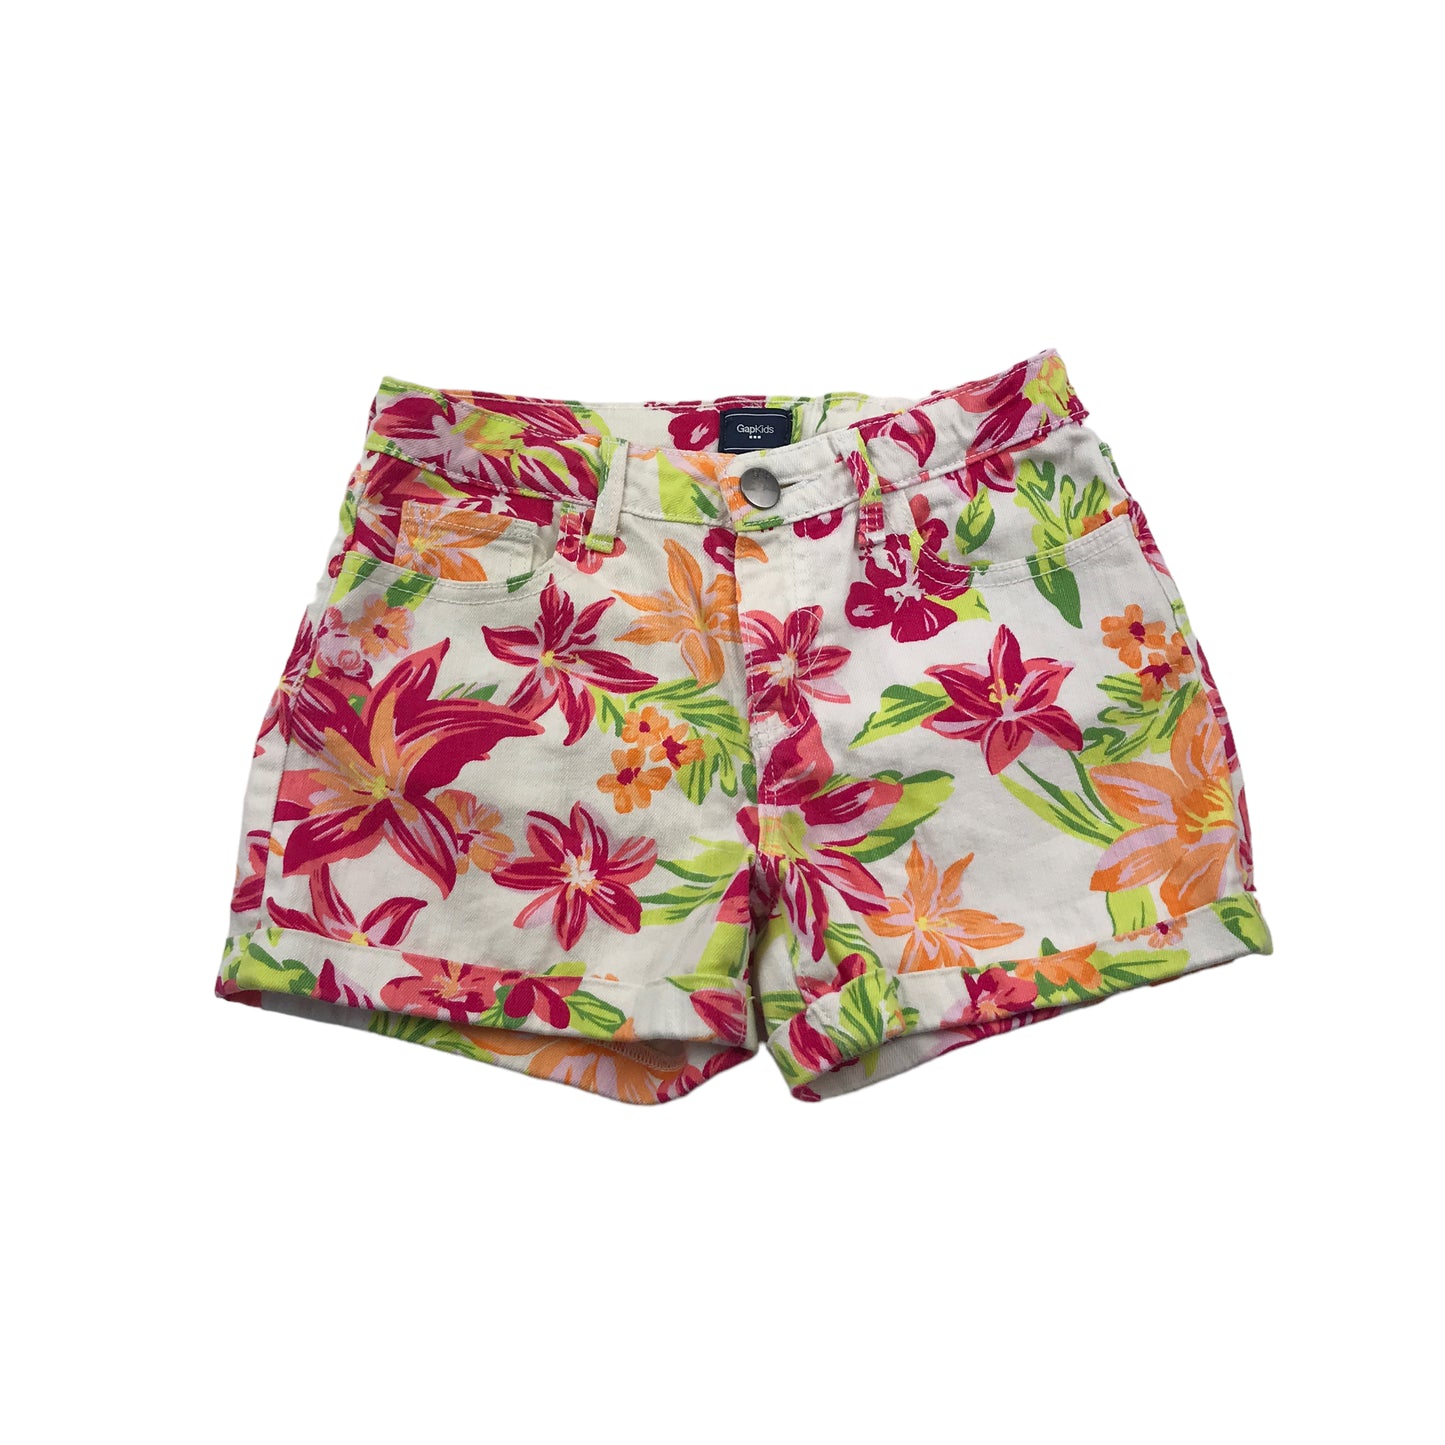 GAP White Pink and Green Floral Shorts Age 10